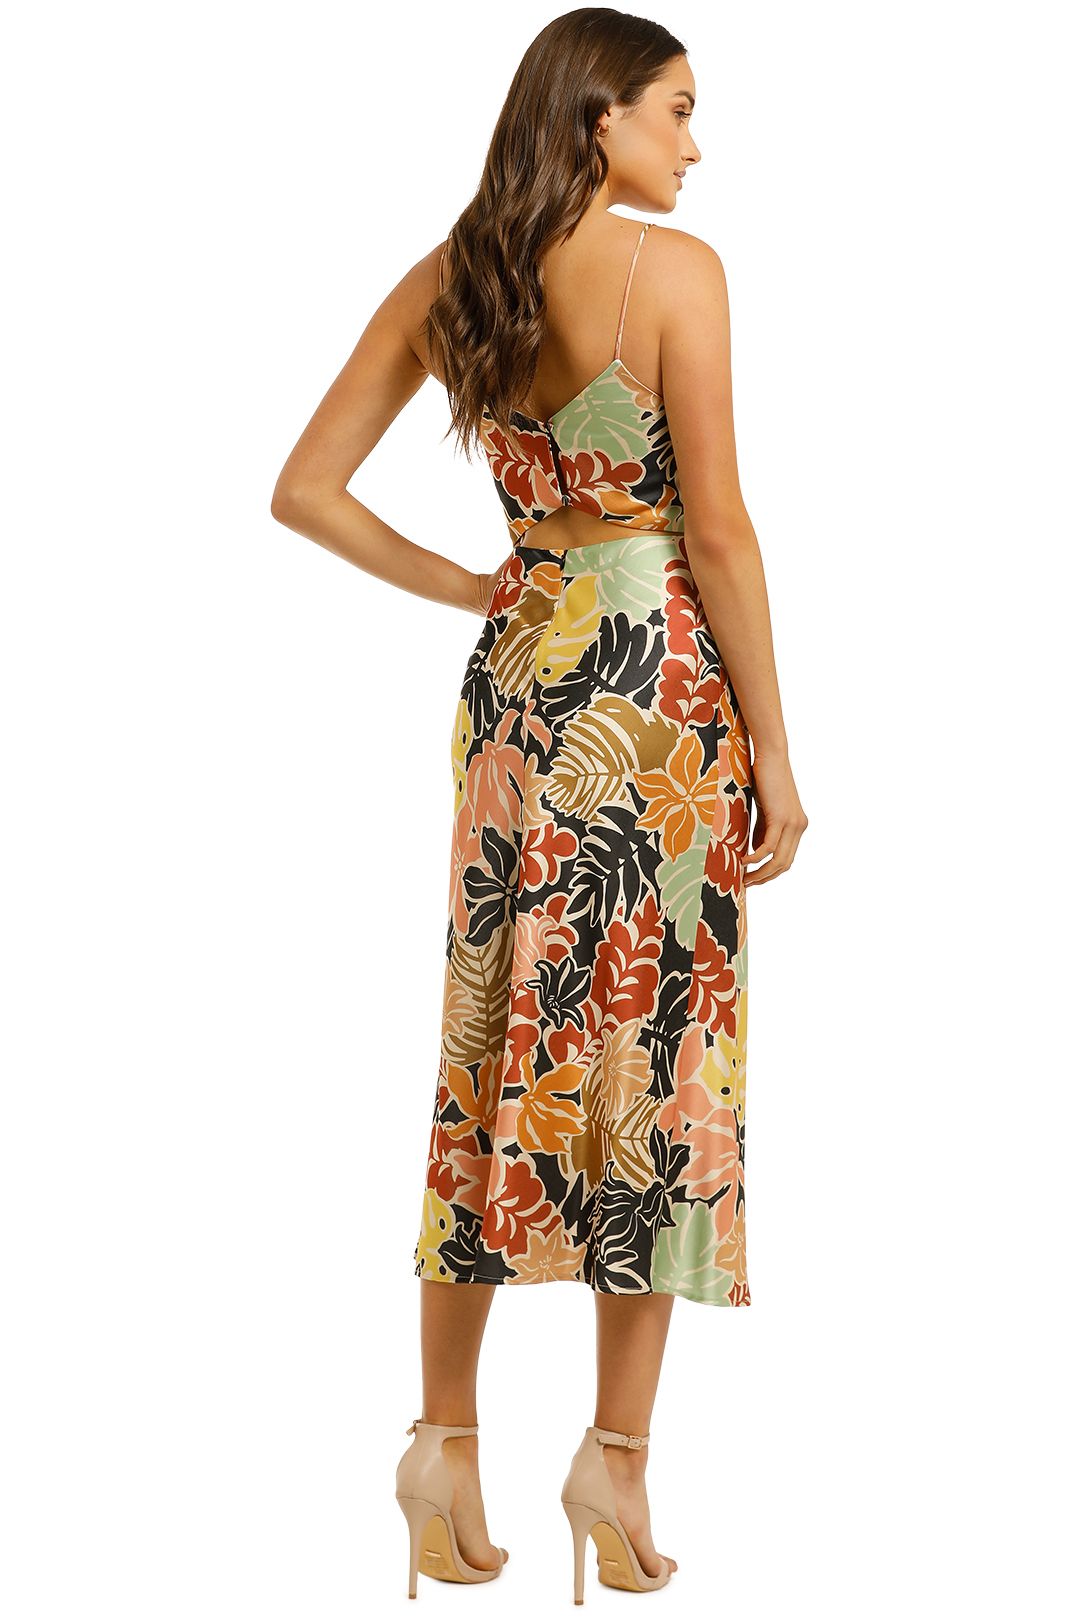 Babelini Midi Dress in Floral by Bec ...